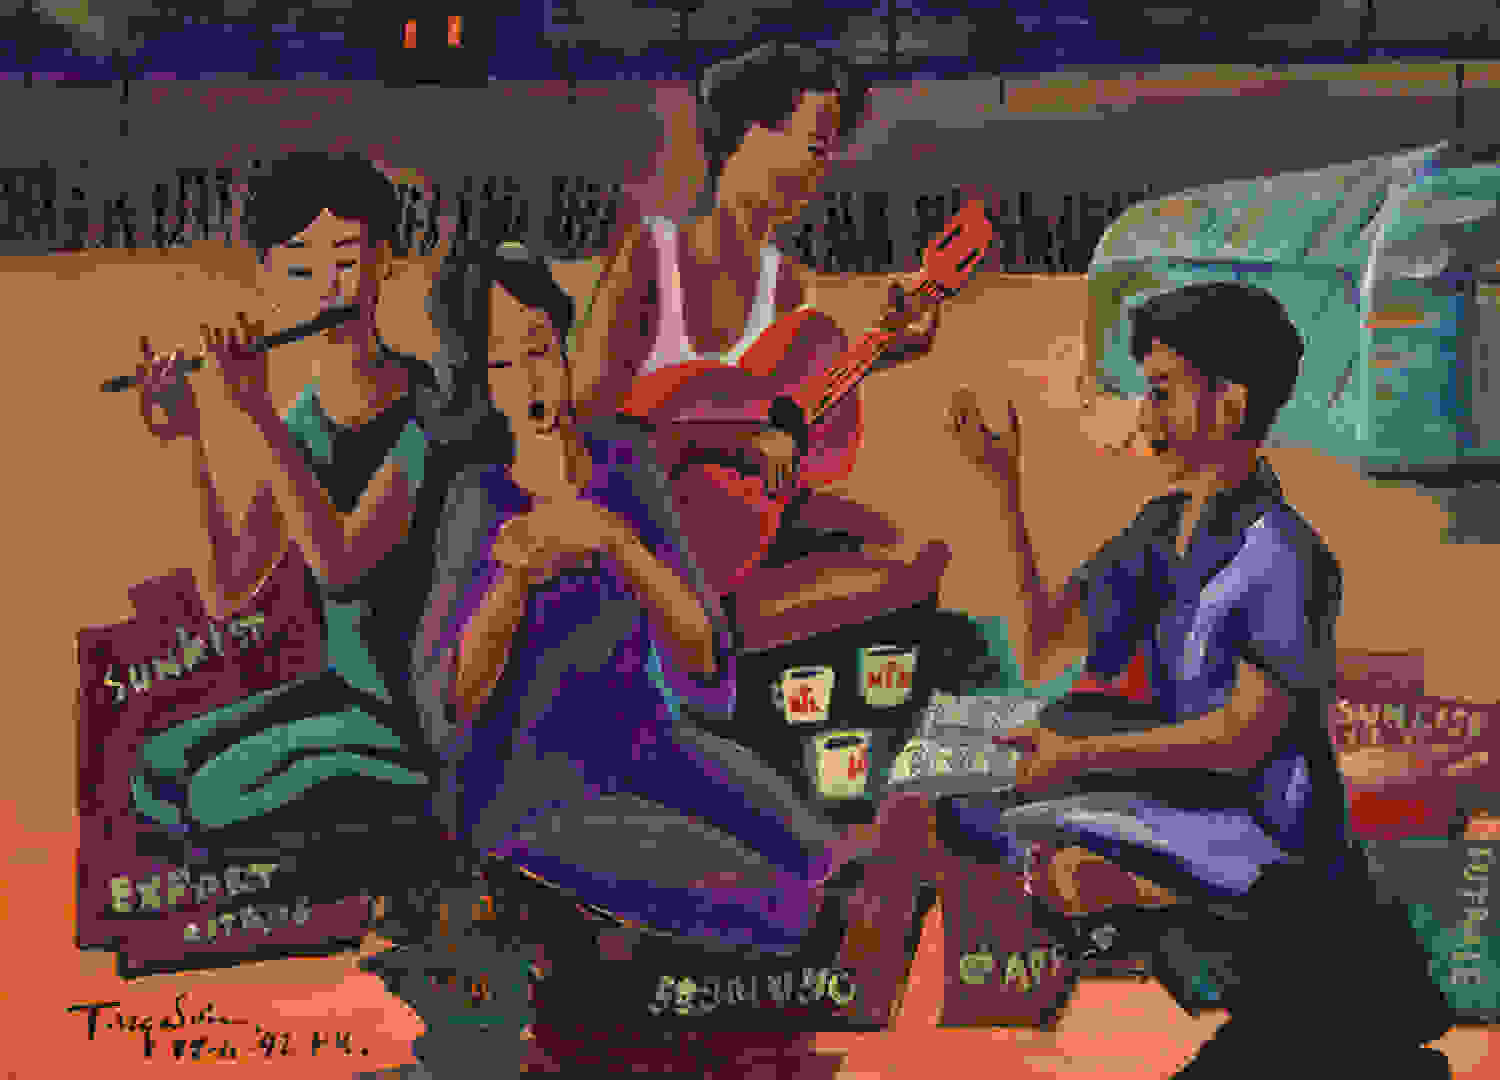 A painting of four women, playing music and socializing